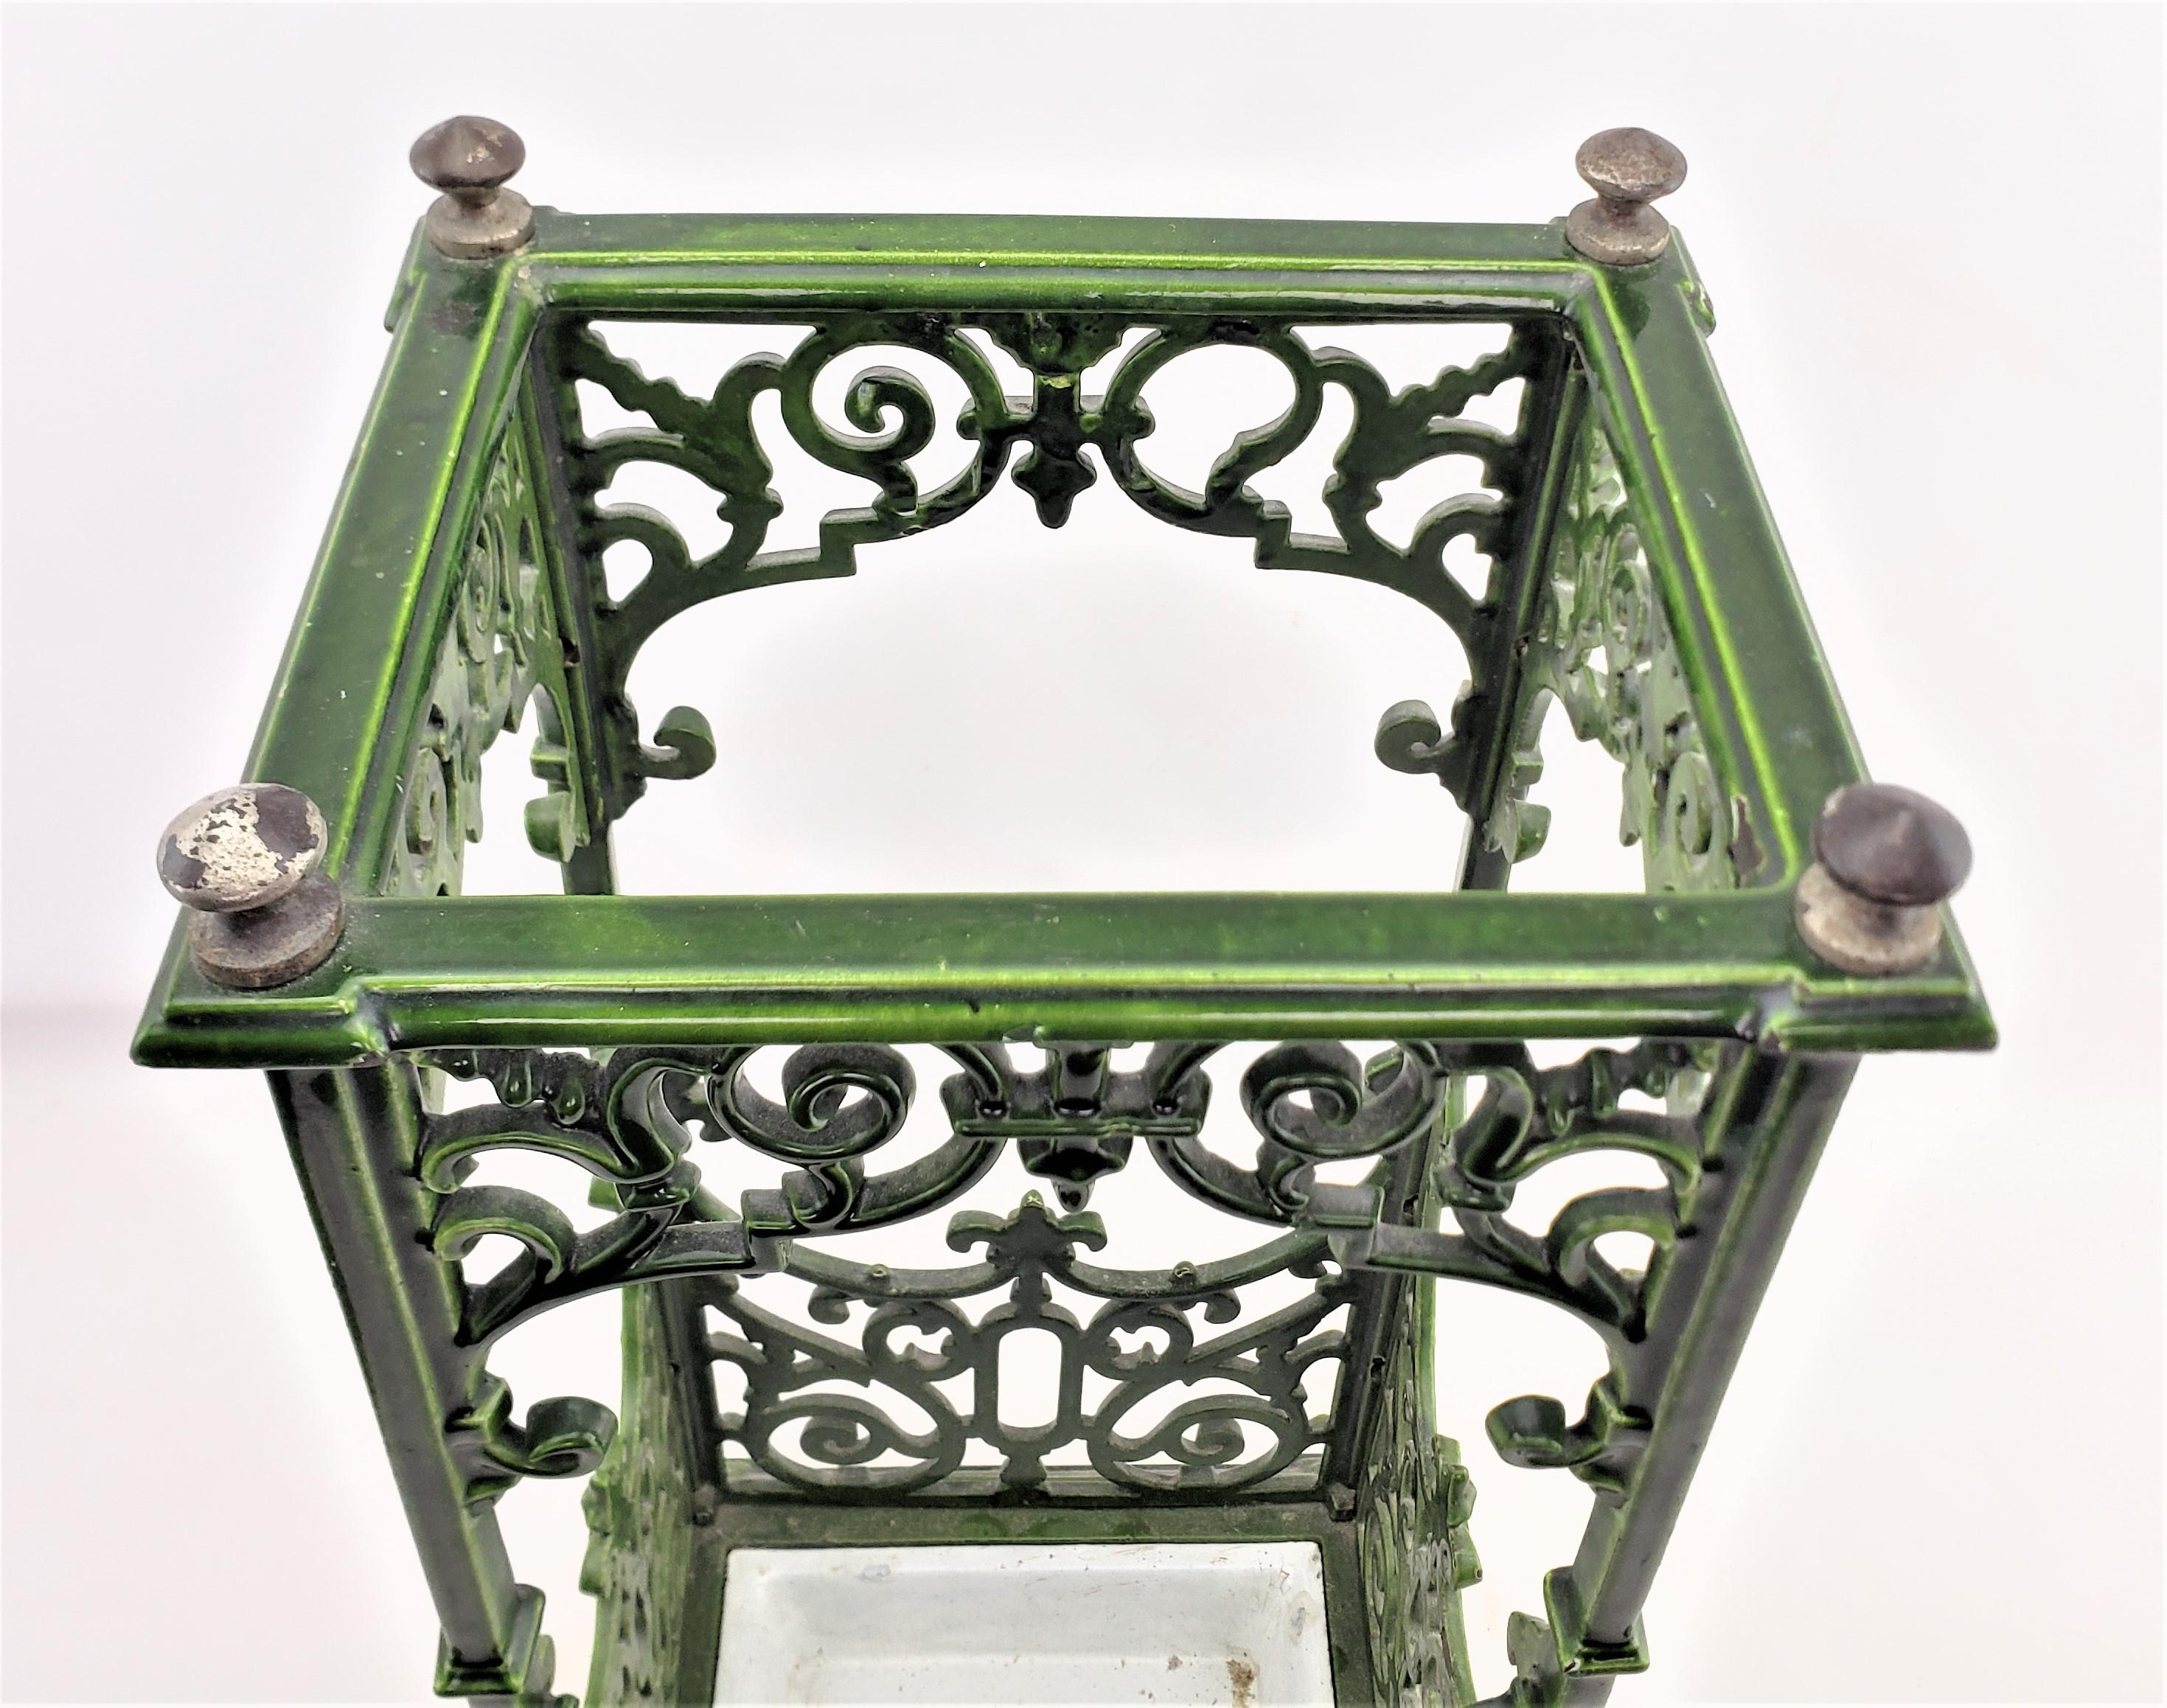 Antique Green Enameled Cast Iron Cane or Umbrella Stand with Brass Accents In Good Condition For Sale In Hamilton, Ontario